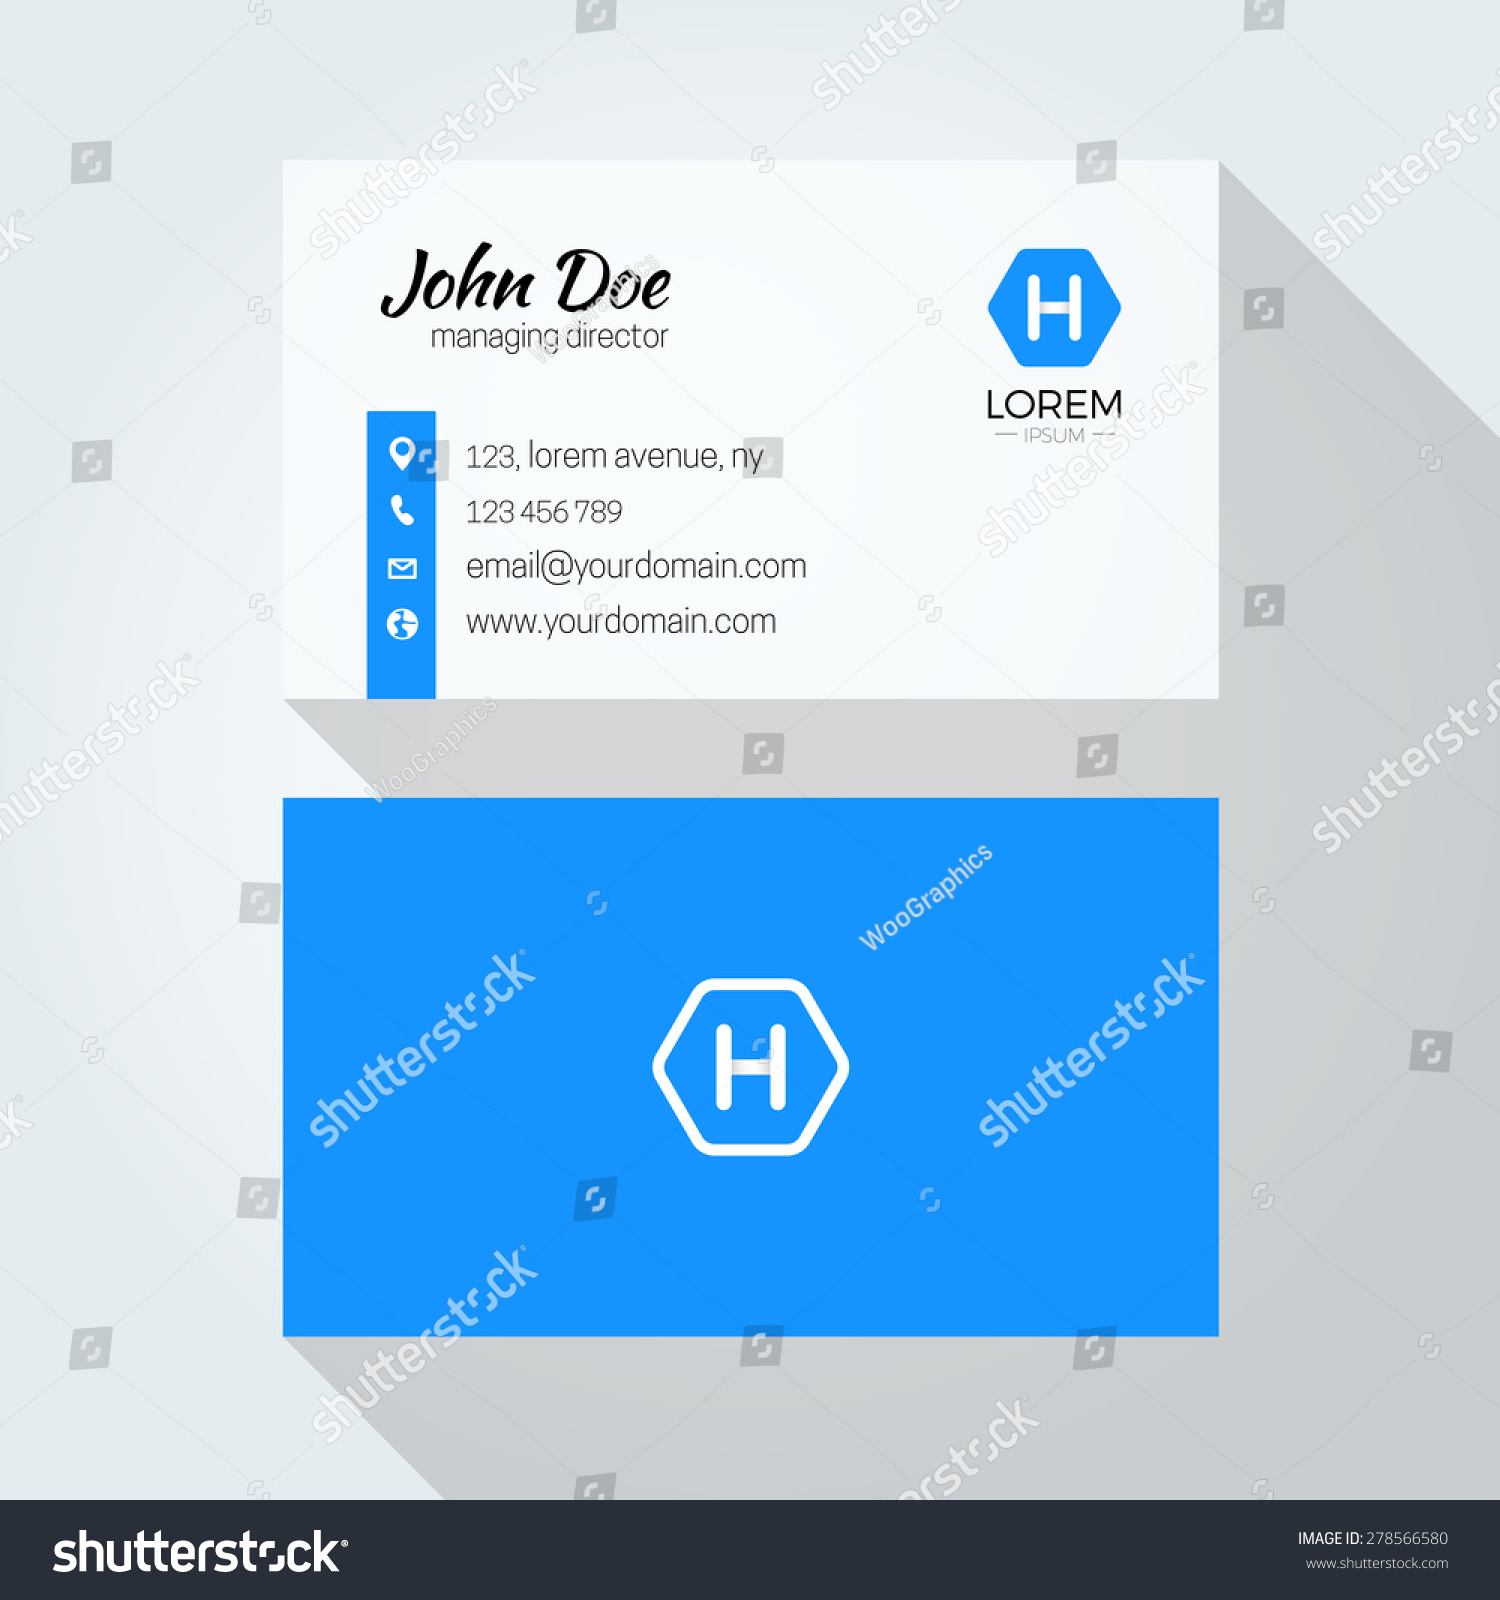 H Letter logo Minimal Corporate Business card #278566580